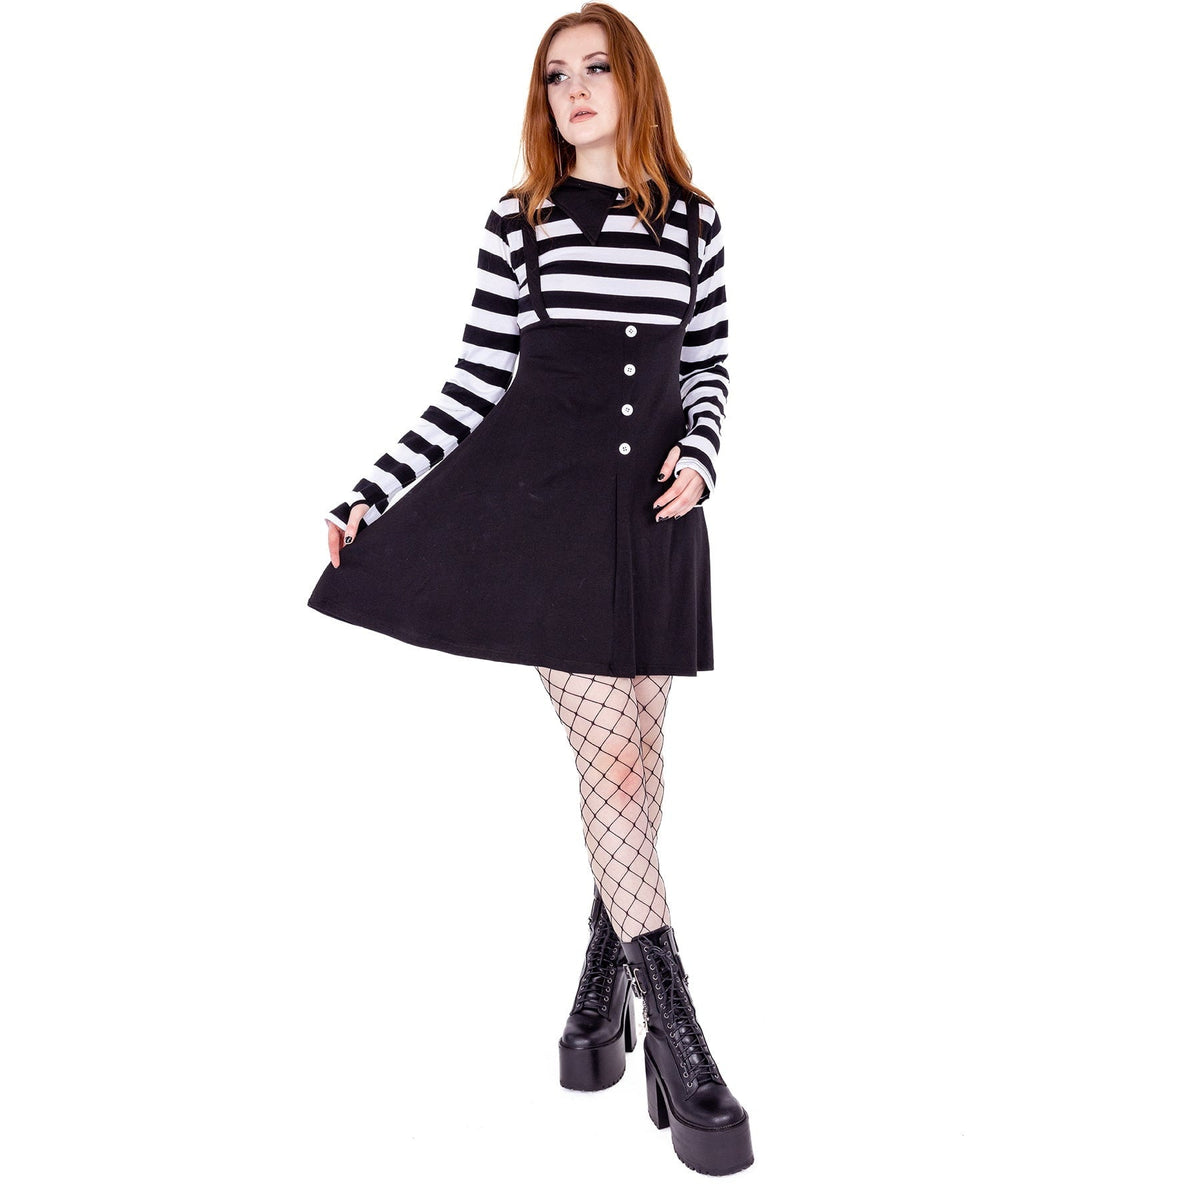 Heartless Bewitched Dress | Black / White